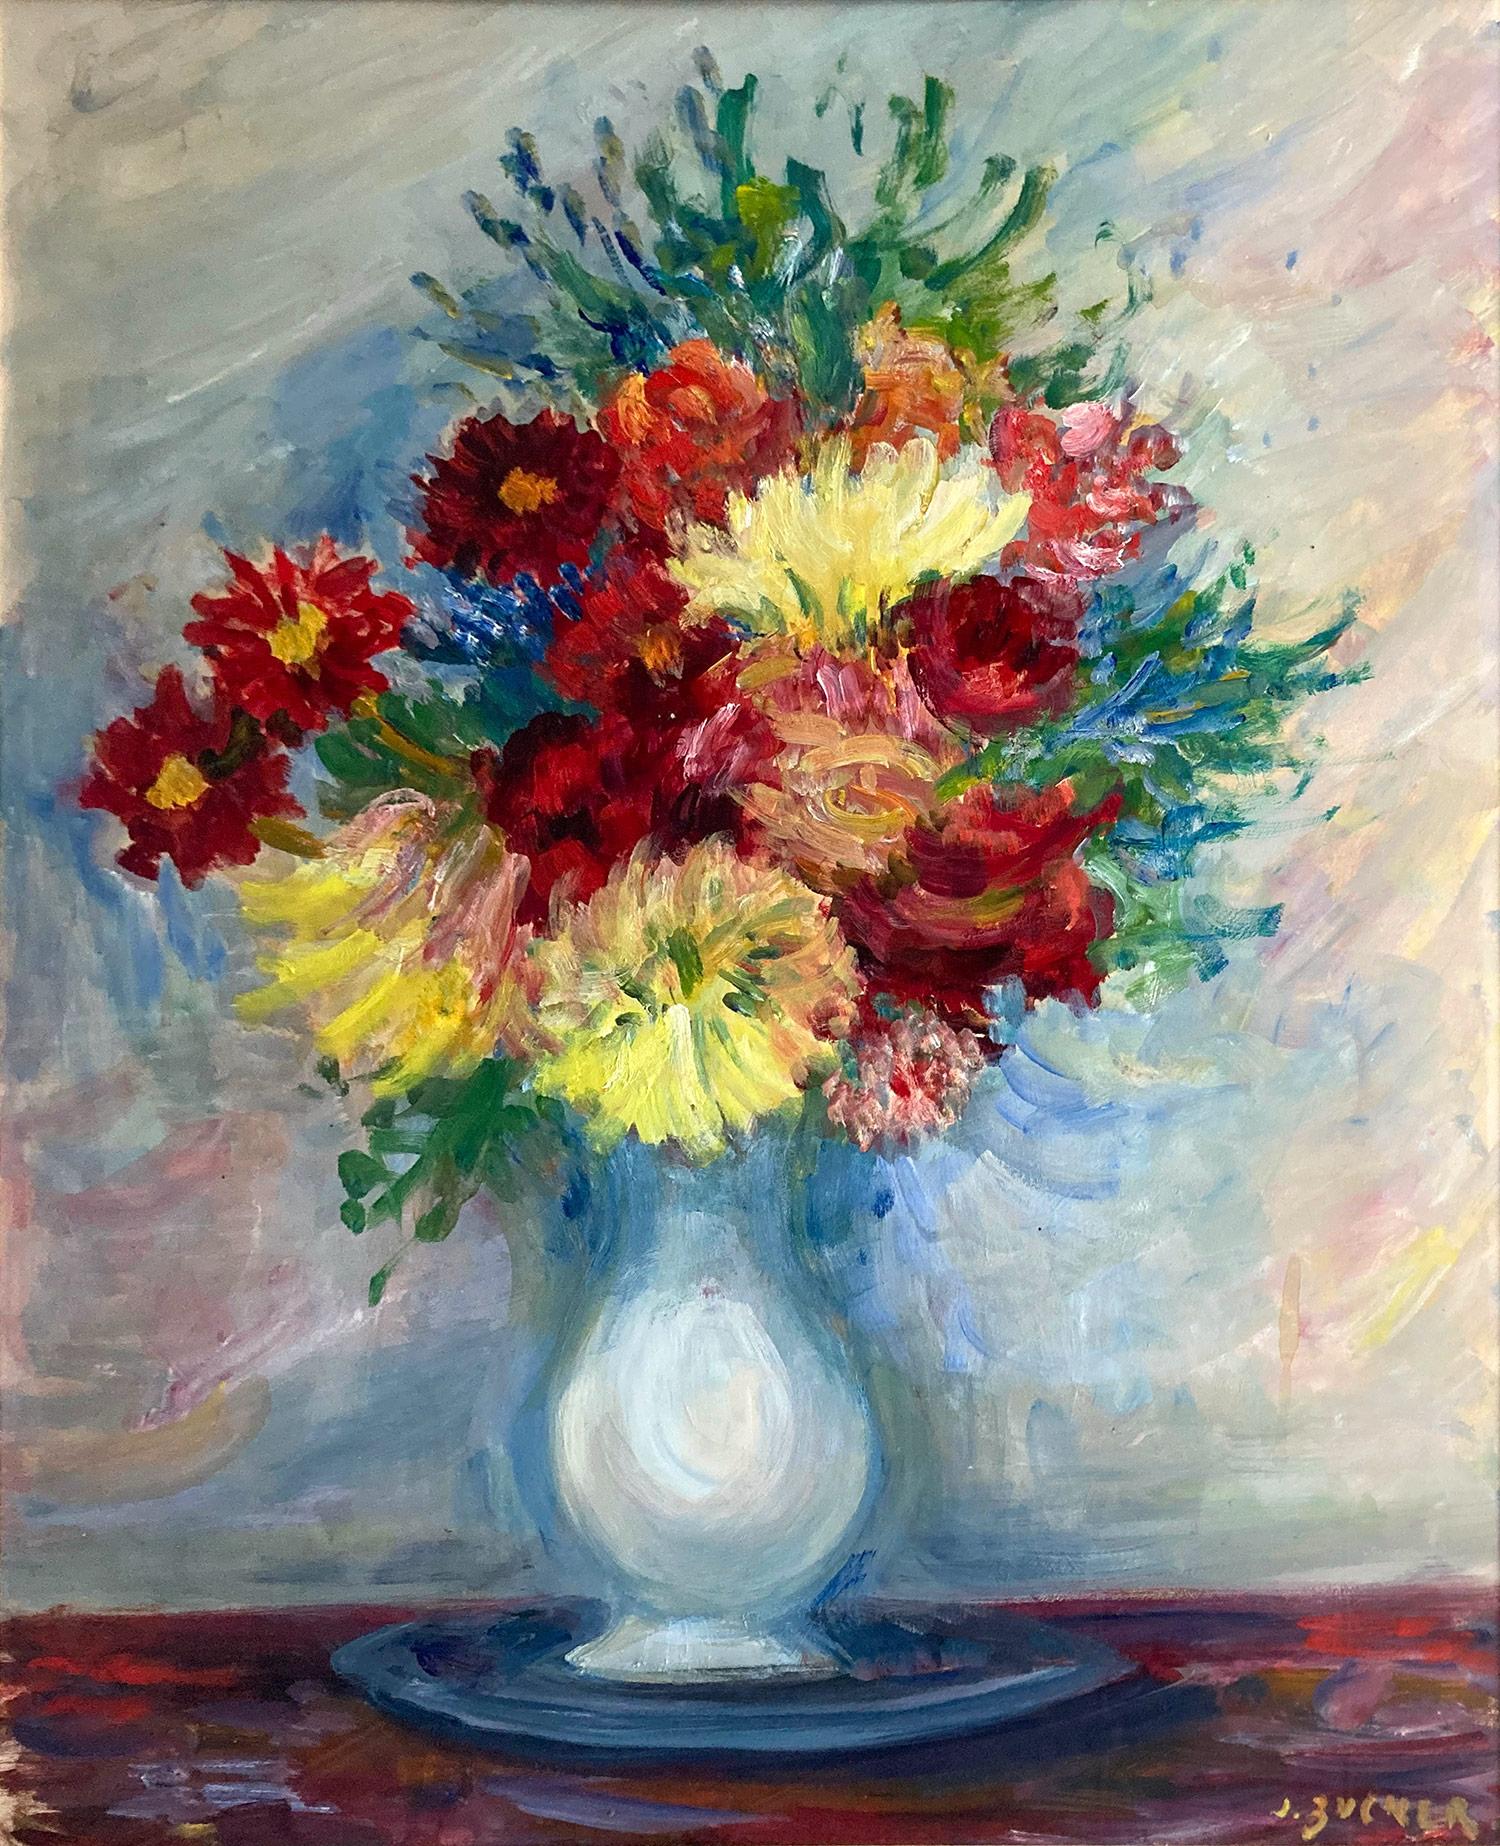 A charming oil painting on paper depicting a colorful floral still life in a white vase on top of a wood table. The flowers depicted are a bright bunch of carnations, daisies, greenery red roses.  The bright colors and quick brush strokes are what